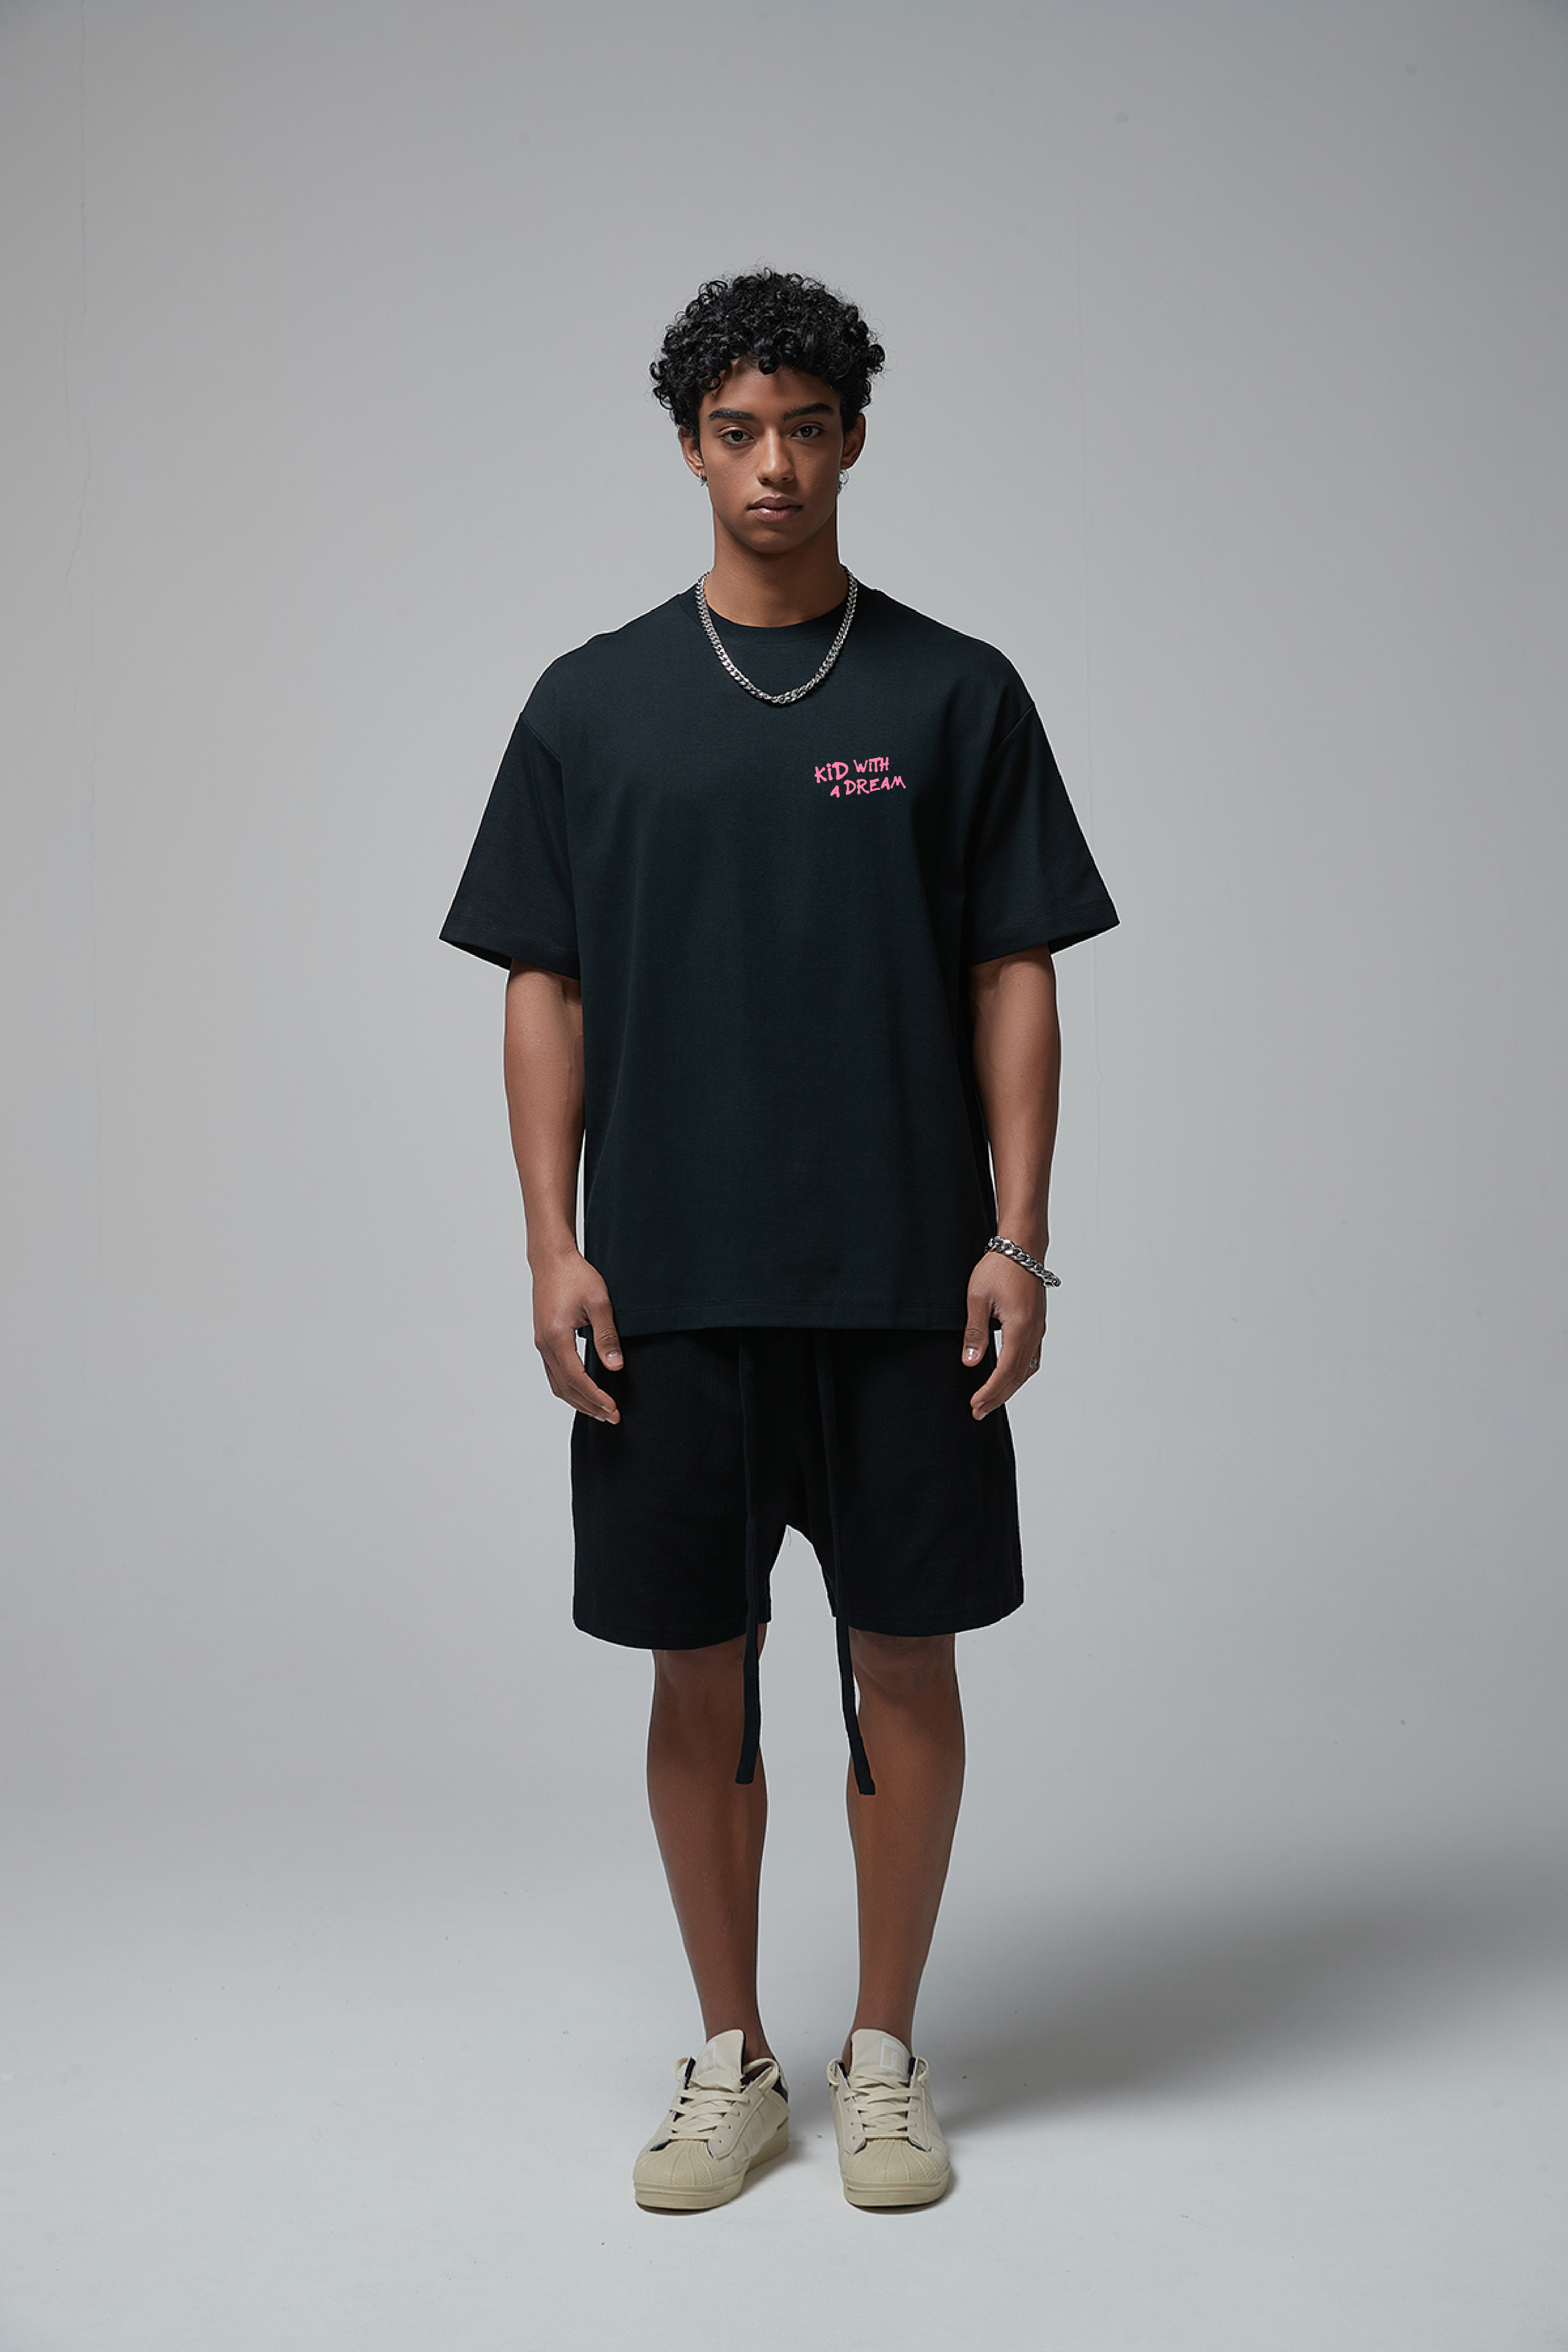 Kid With A Dream T-Shirt Black/Rose'